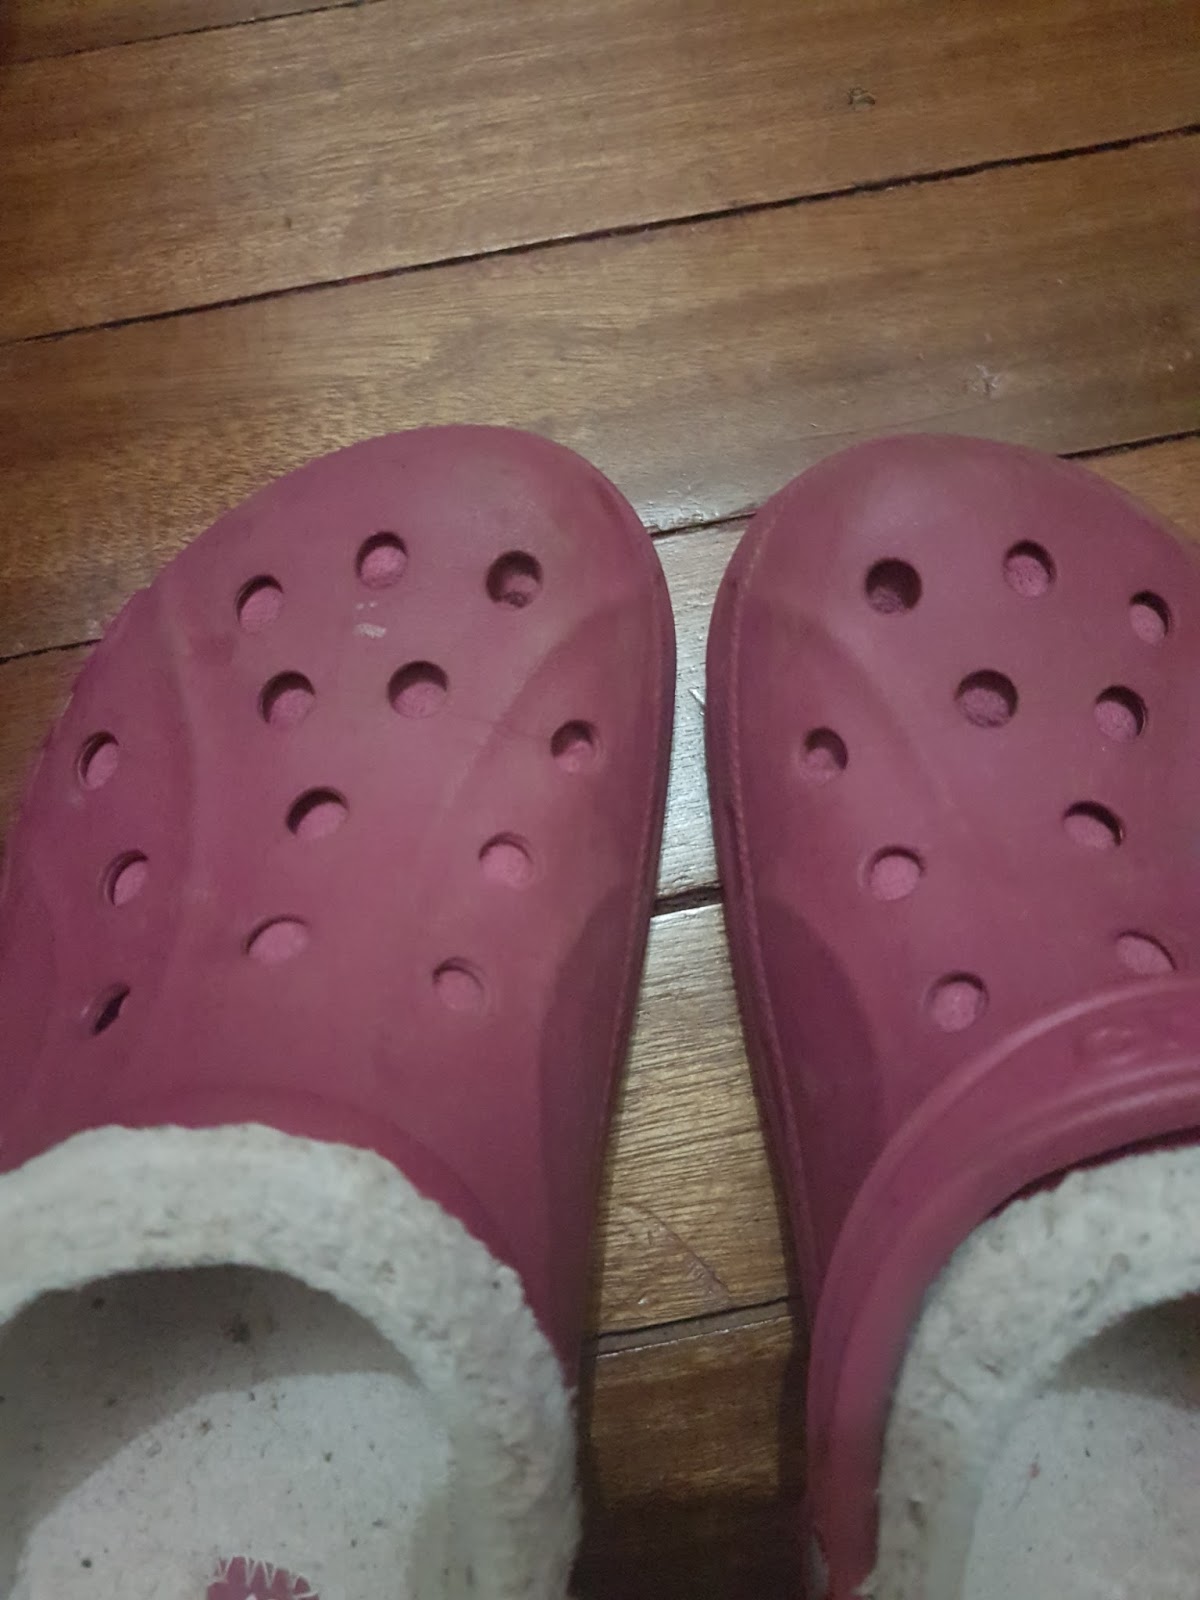 10 health facts why wearing rubber crocs is bad for your health | The ...